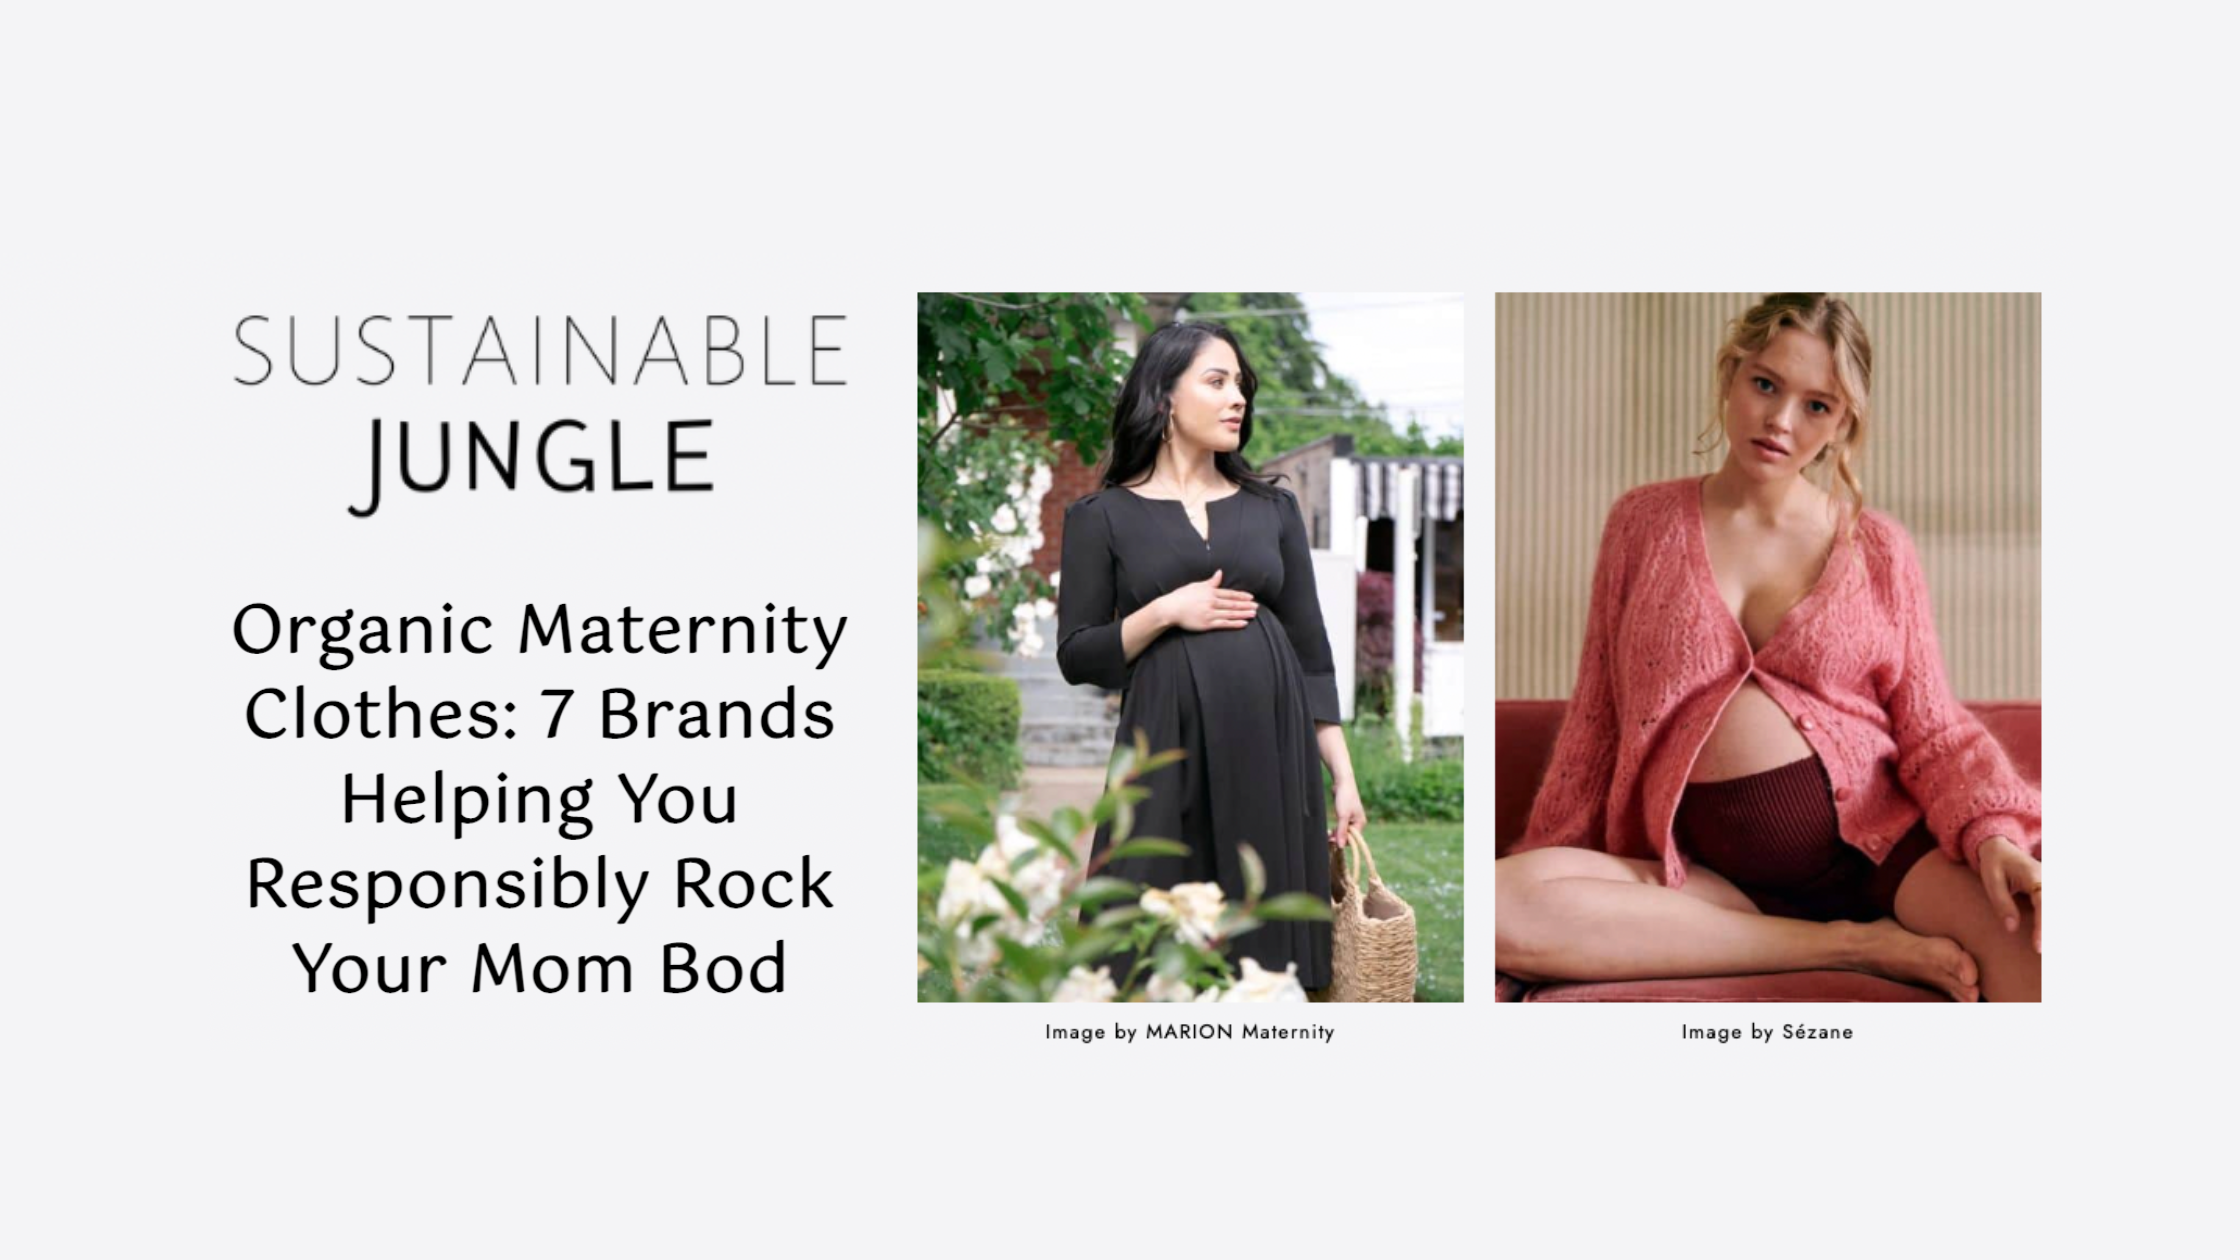 Organic Maternity Clothes: 7 Brands Helping You Responsibly Rock